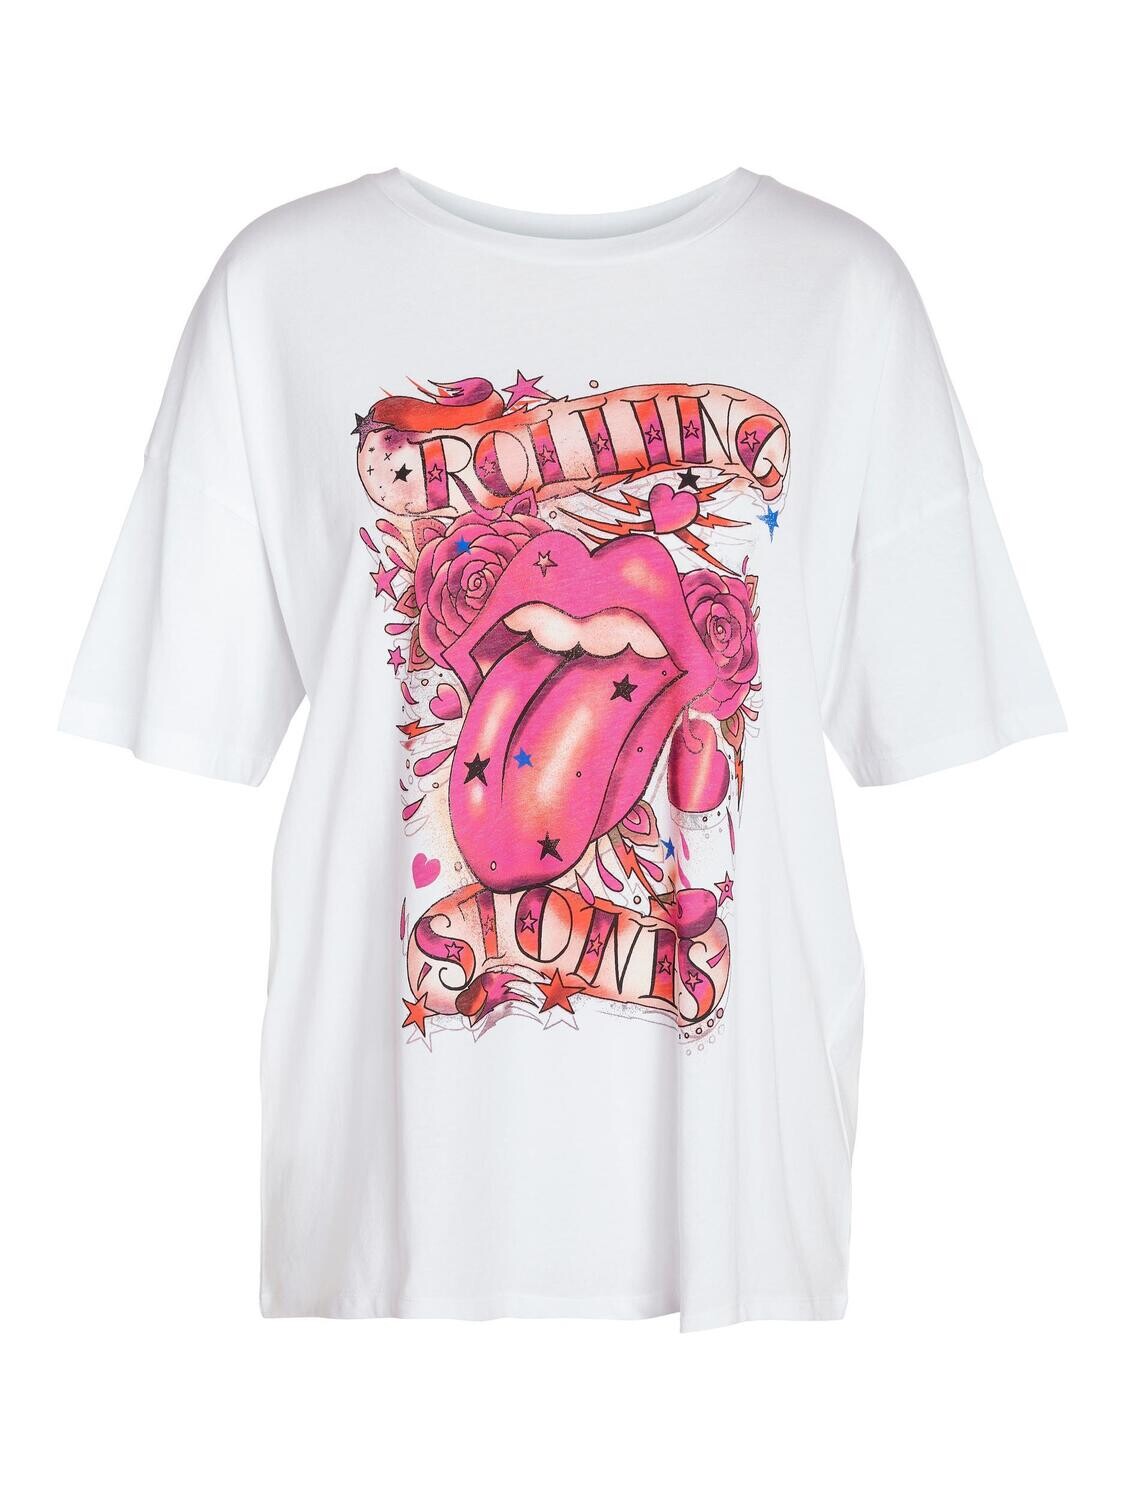 NMIDA RS S/S T-SHIRT FWD Bright White-ROLLING STONES